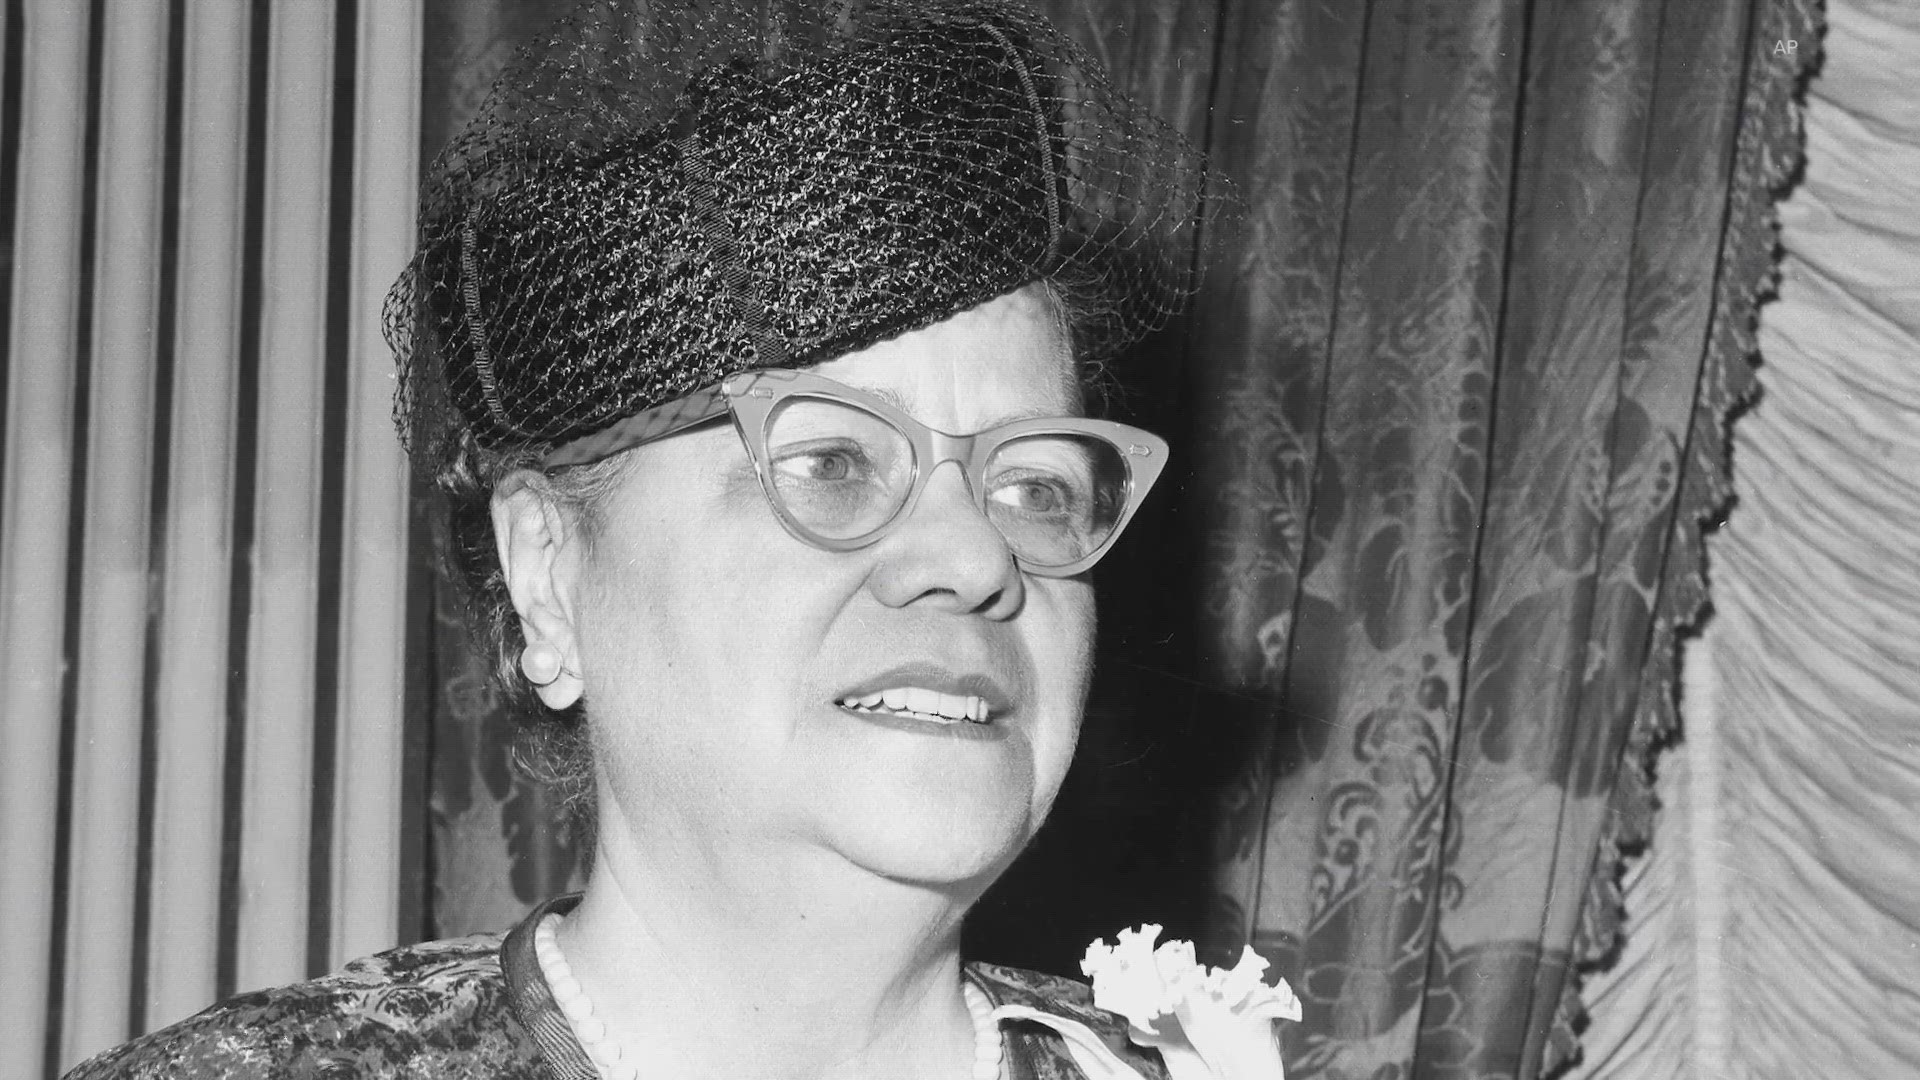 Civil rights activist Anna Arnold Hedgeman played a key role in organizing the demonstration.